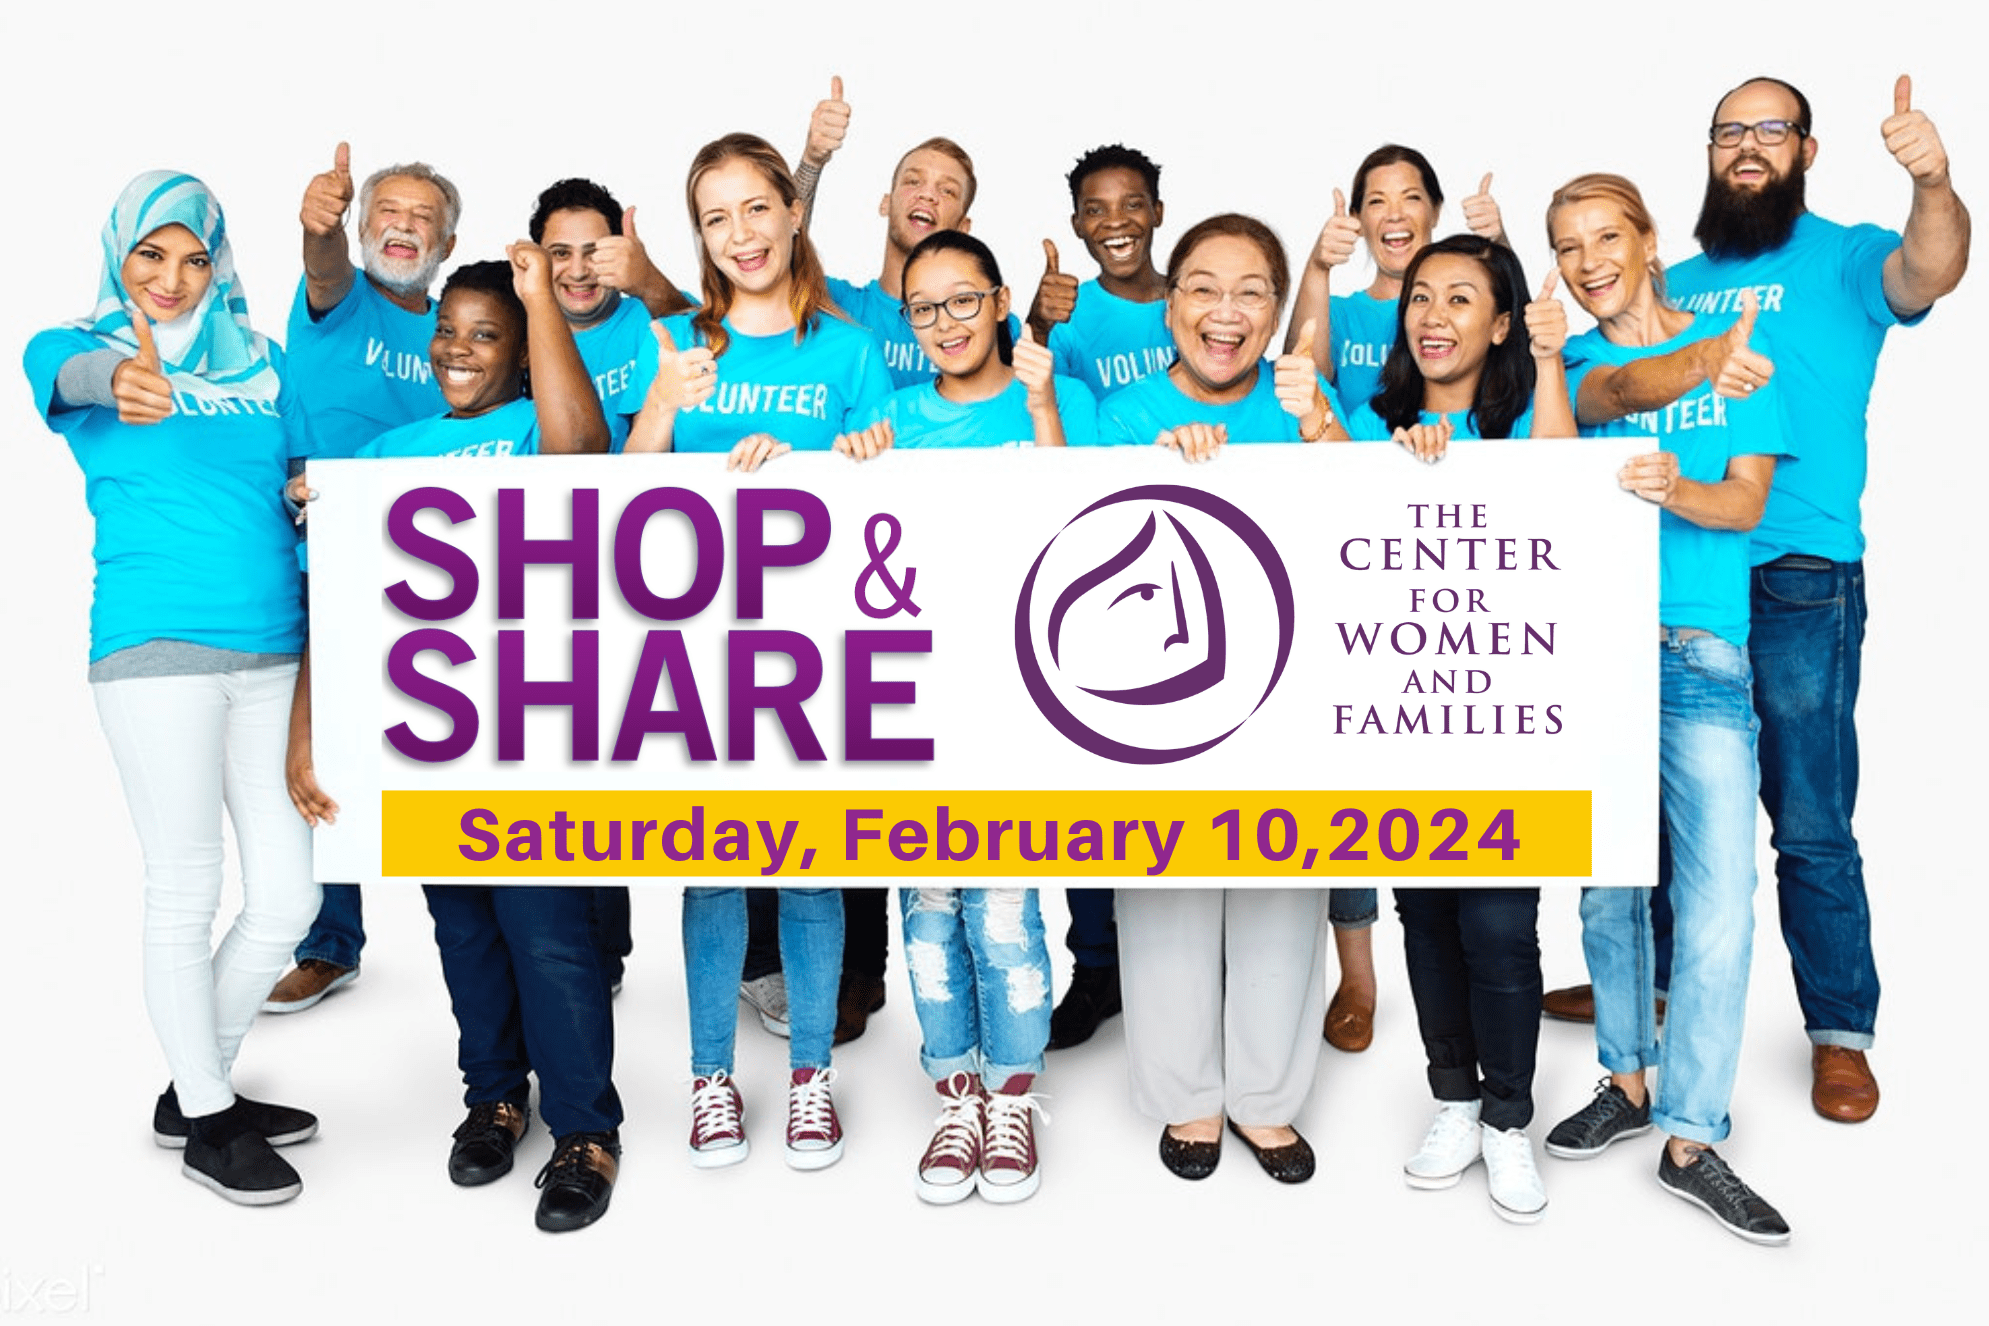 Photo of diverse volunteers holding Shop and Share sign